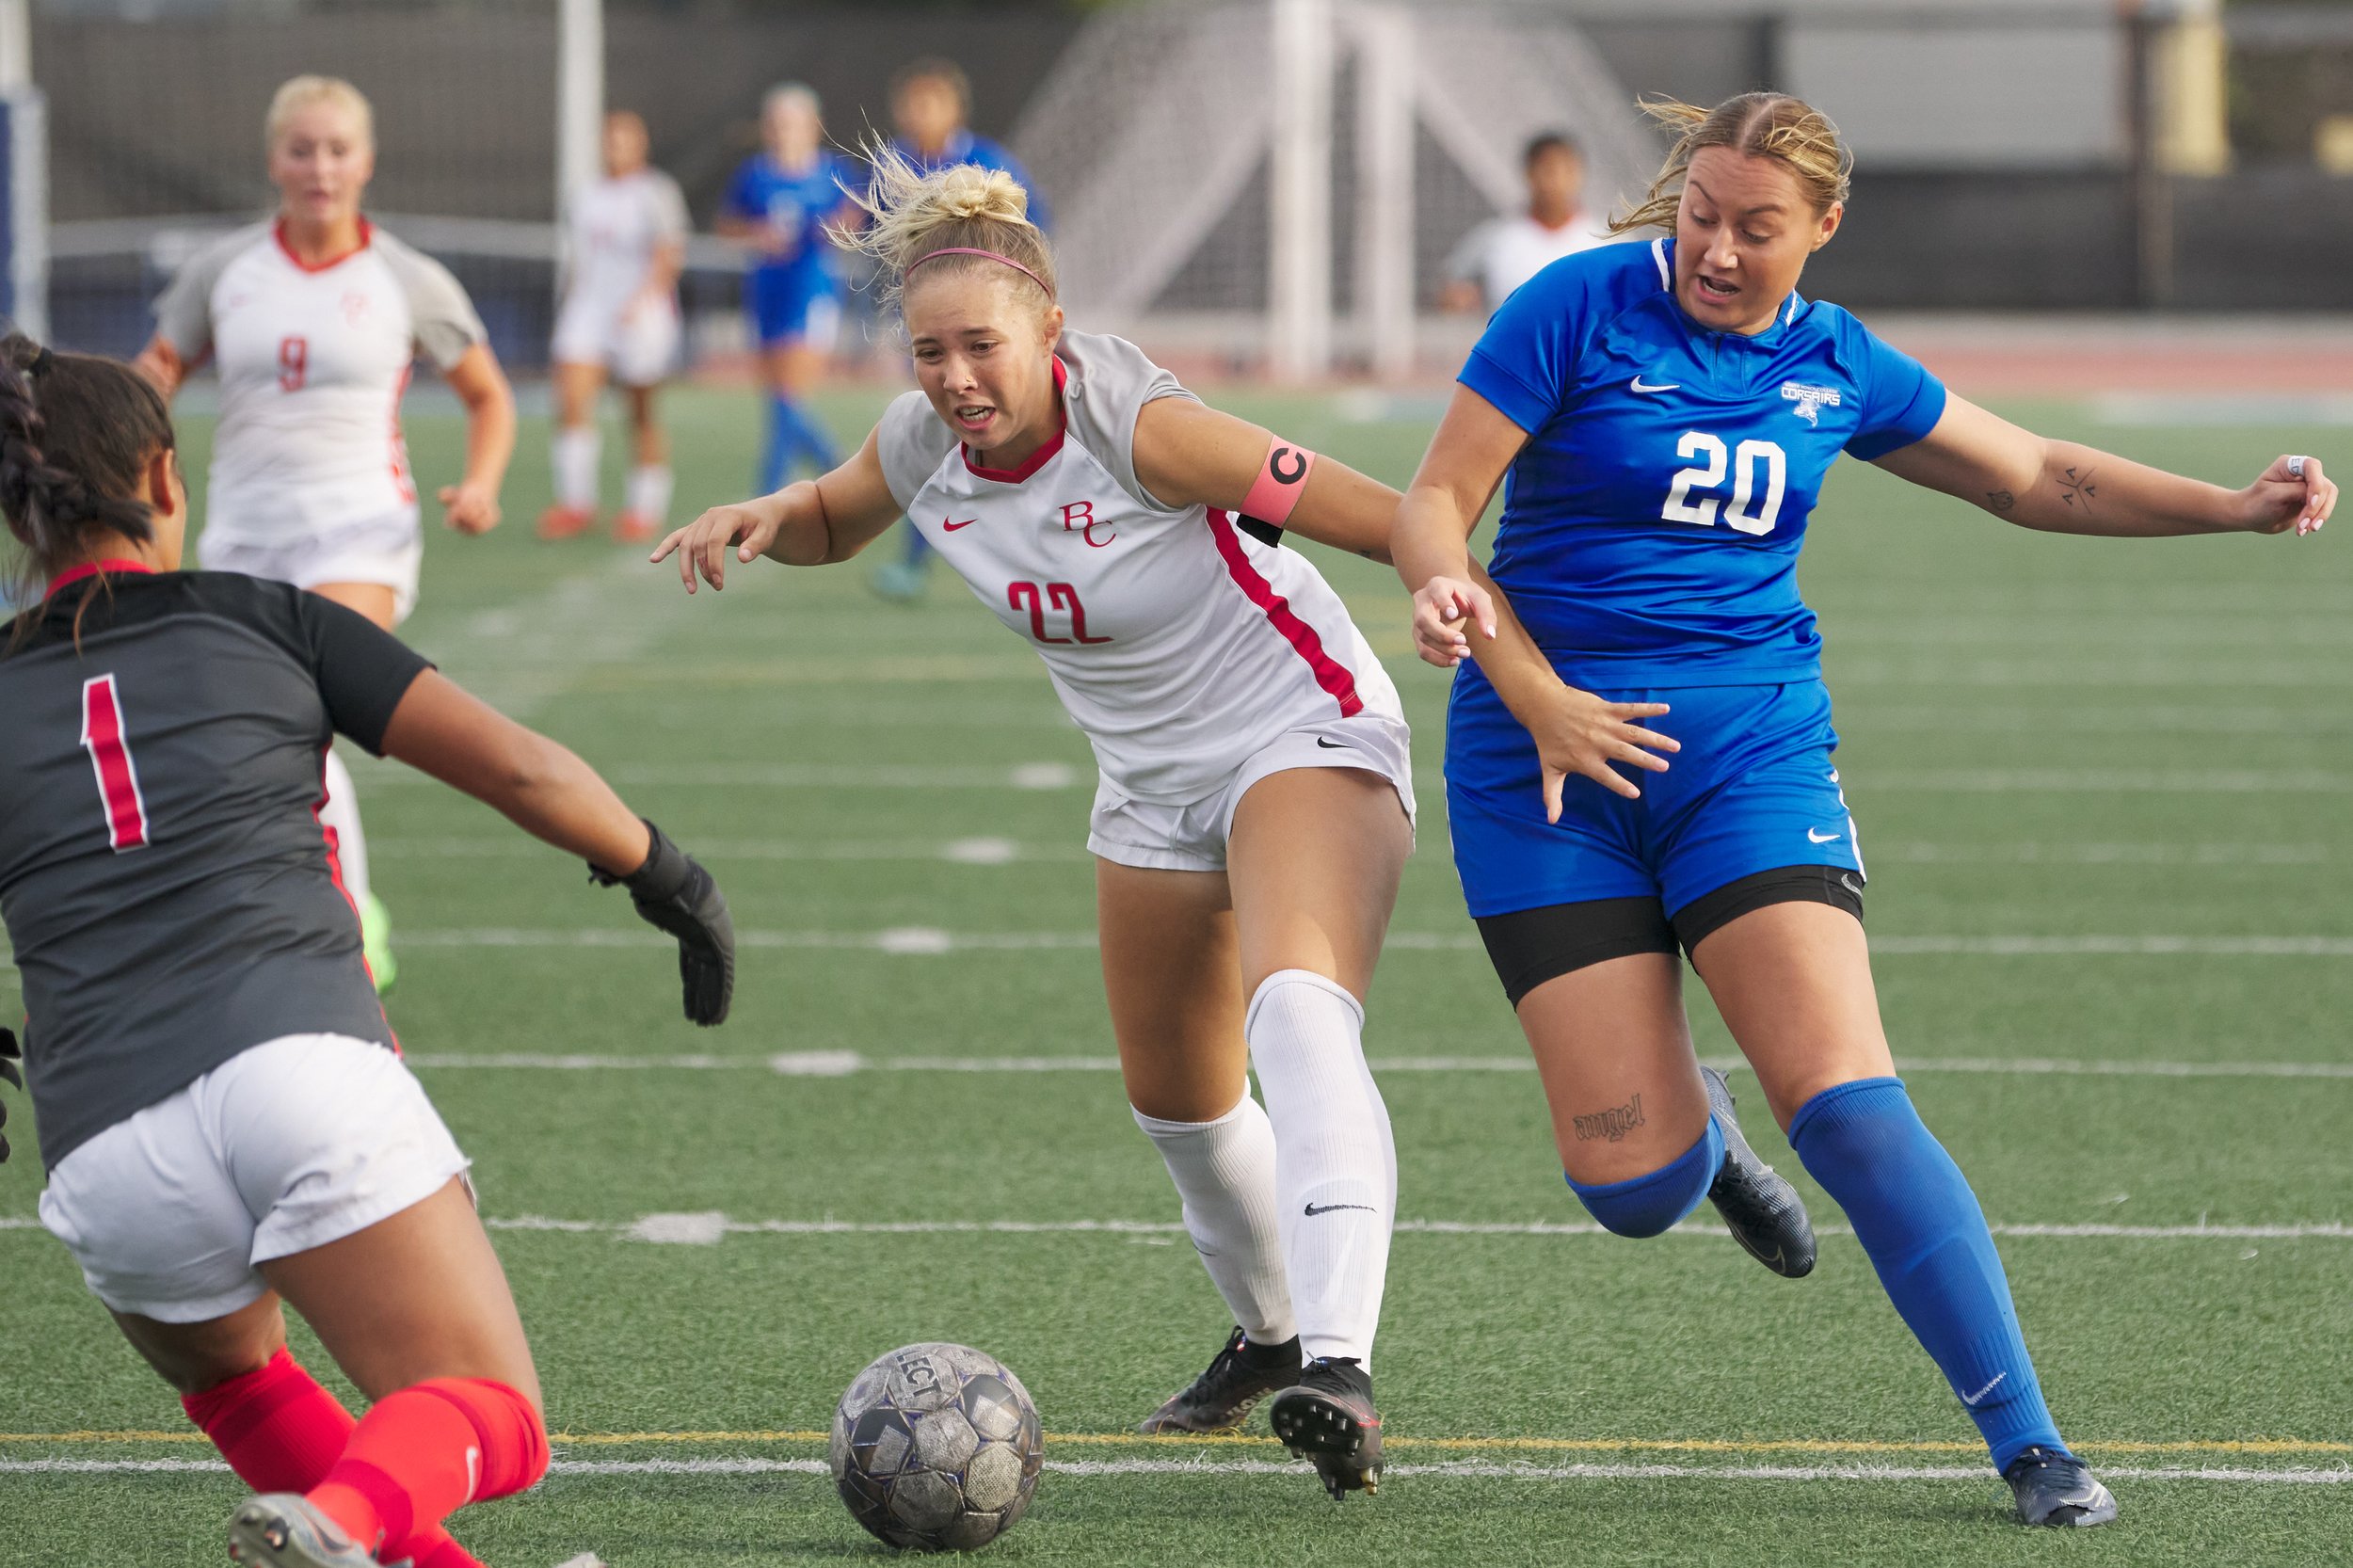  Bakersfield College Renegades' Goalie Katelyn Gonzales, Myla Chow, and Santa Monica College Corsairs' Alicia Edberg during the women's soccer match on Friday, Oct. 20, 2022, at Corsair Field in Santa Monica, Calif. The Corsairs tied 1-1. (Nicholas M